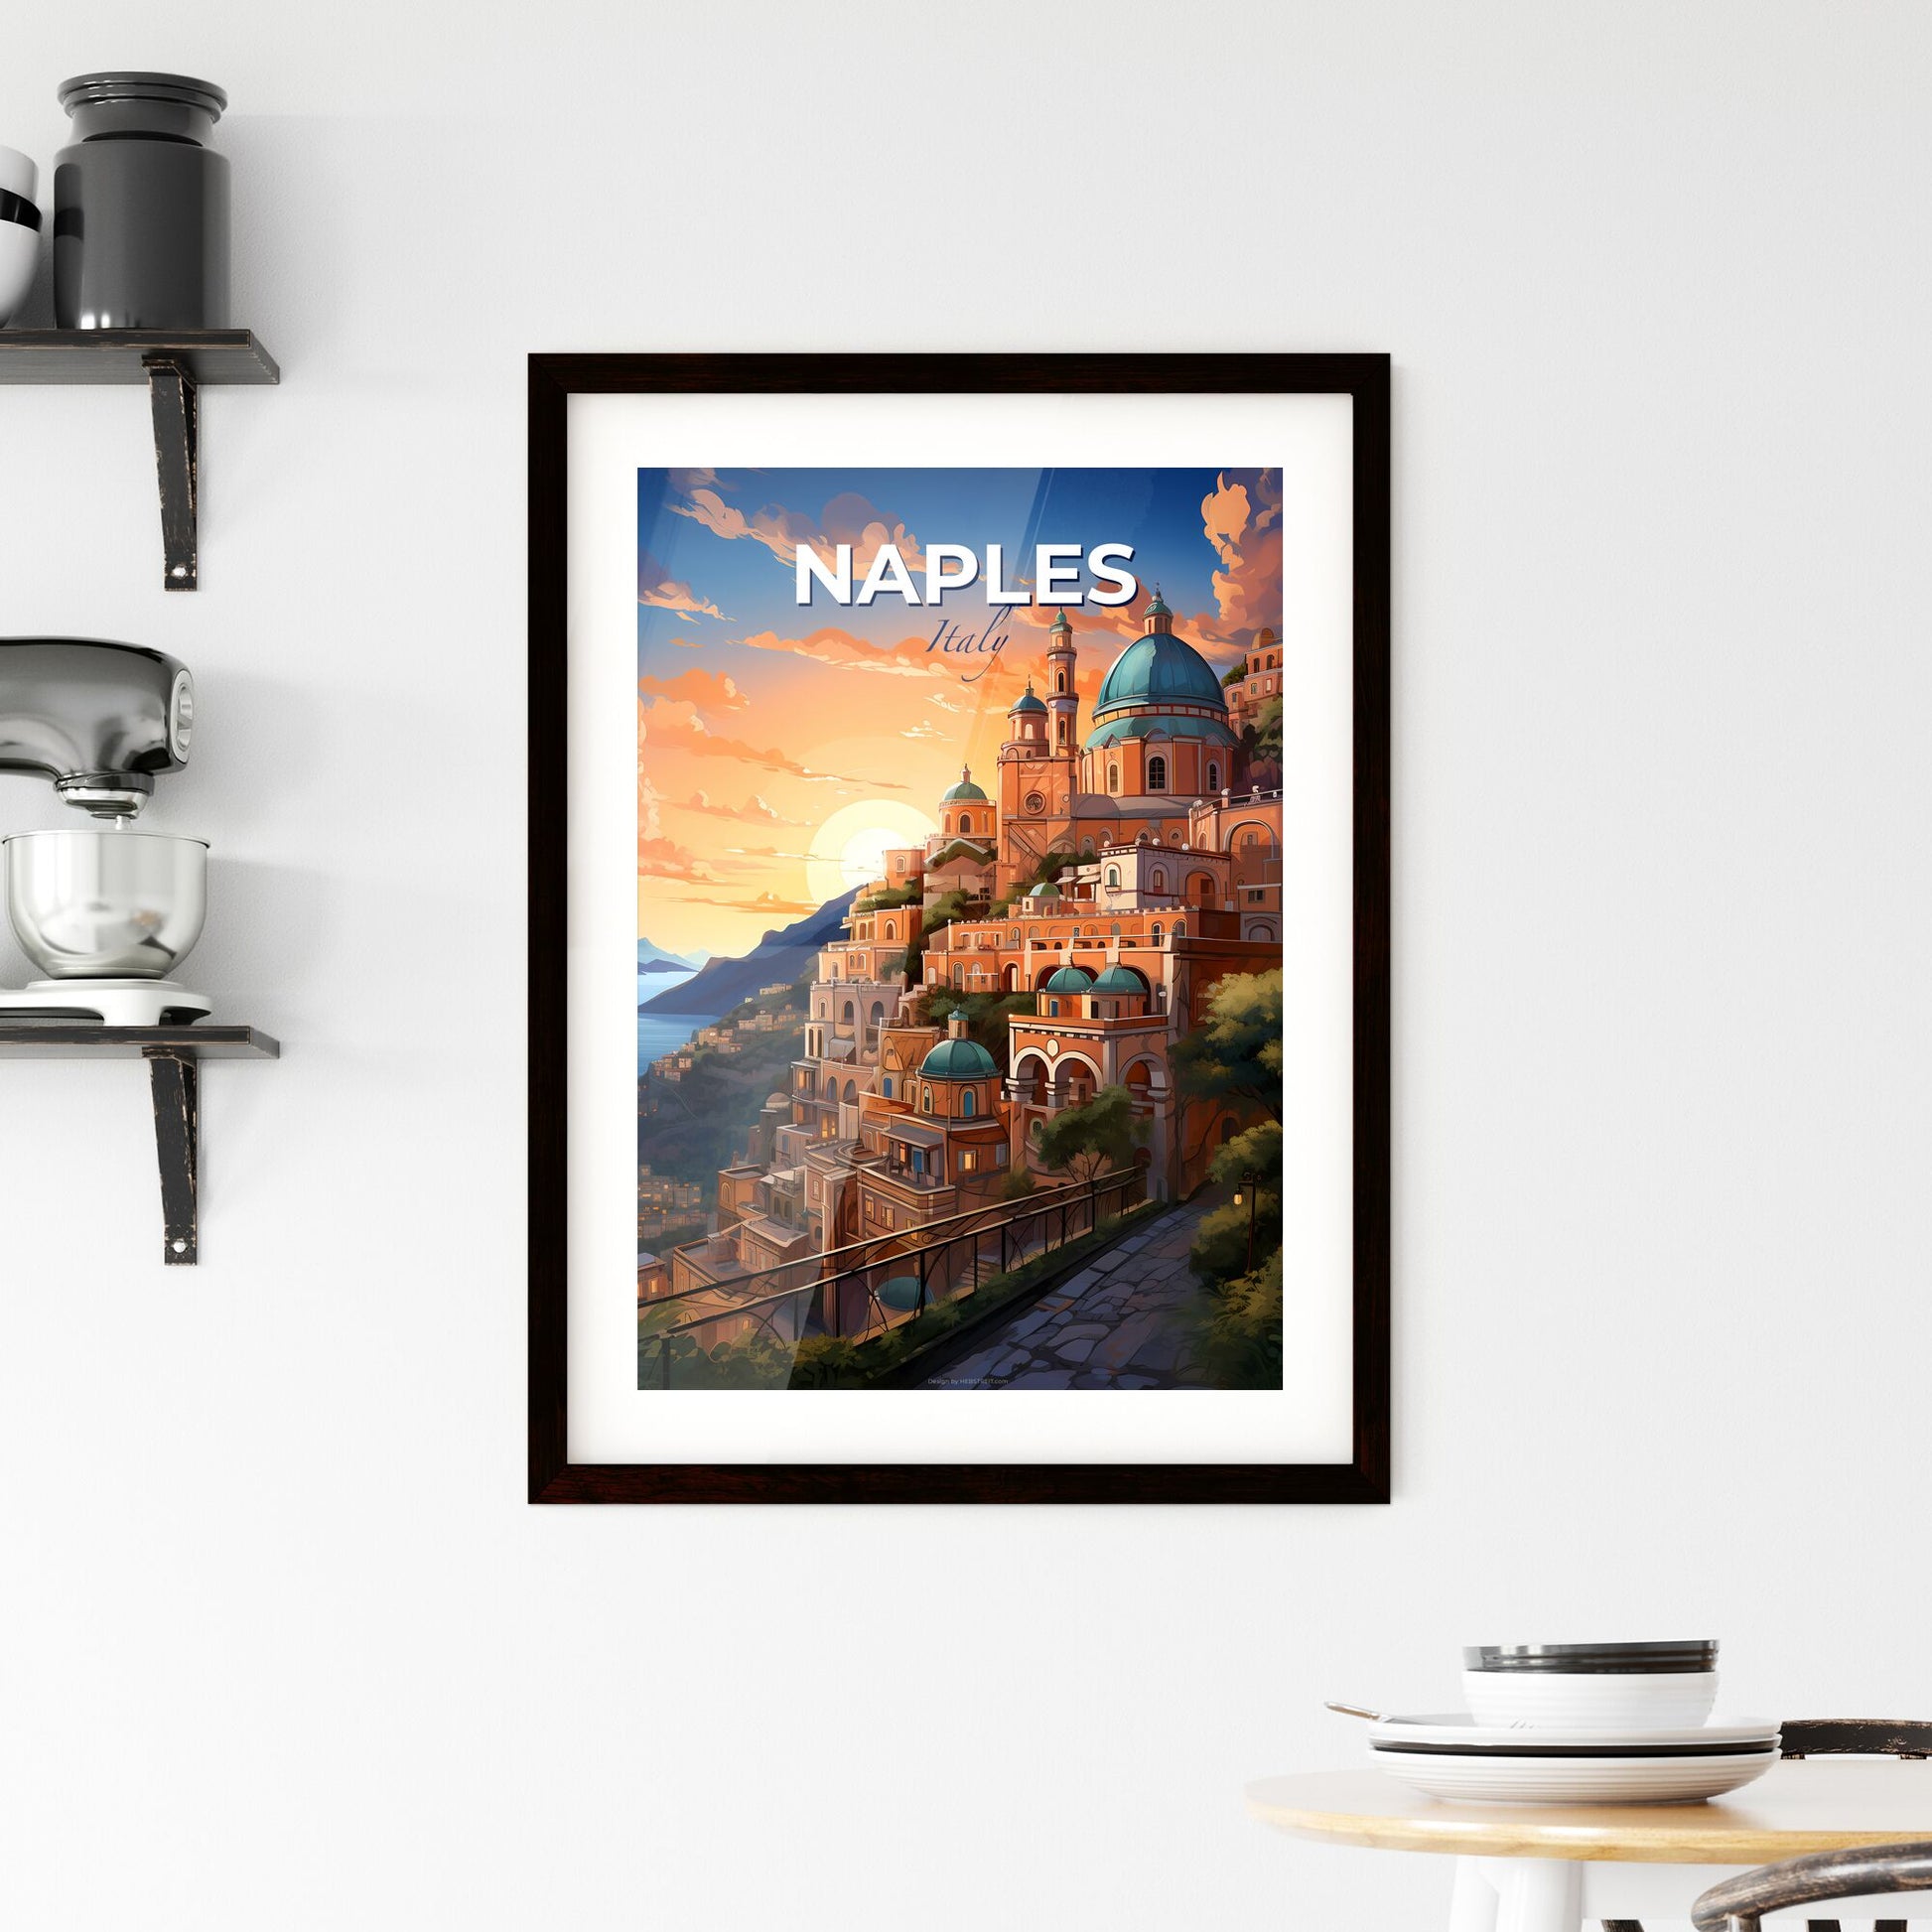 Naples, Italy, A Poster of a city on a hill with a blue dome and trees Default Title